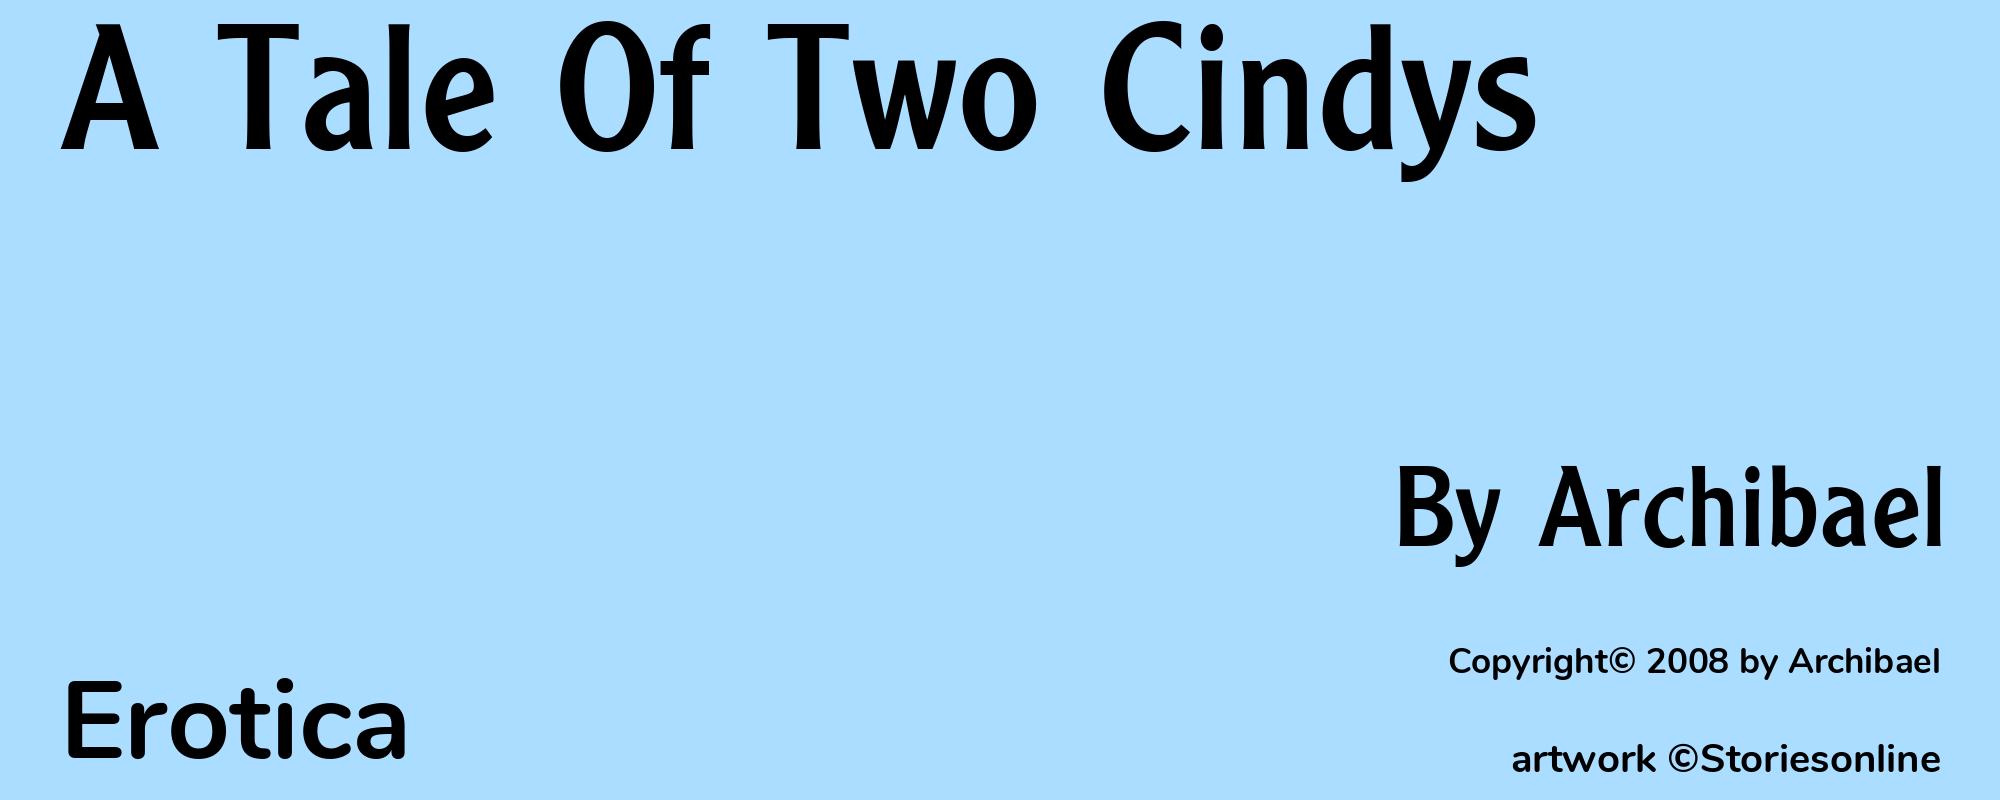 A Tale Of Two Cindys - Cover